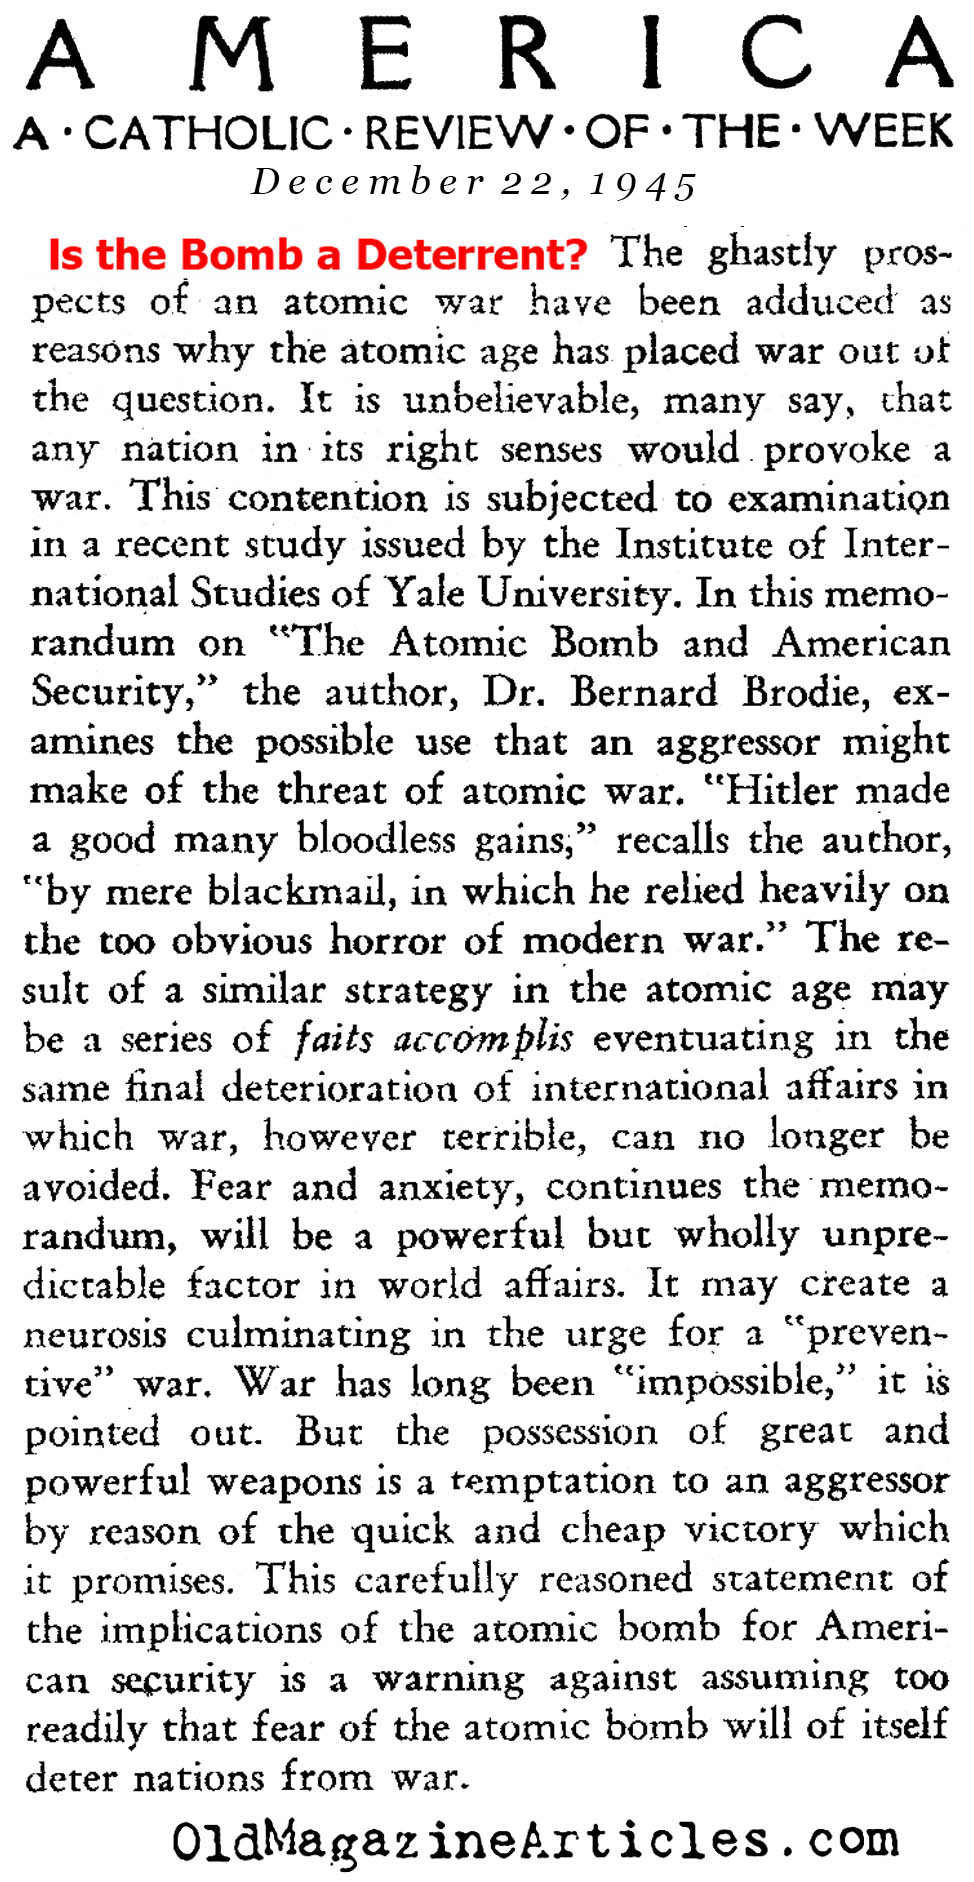 ''Is the Atom Bomb a Deterrent?'' (America Weekly, 1945)